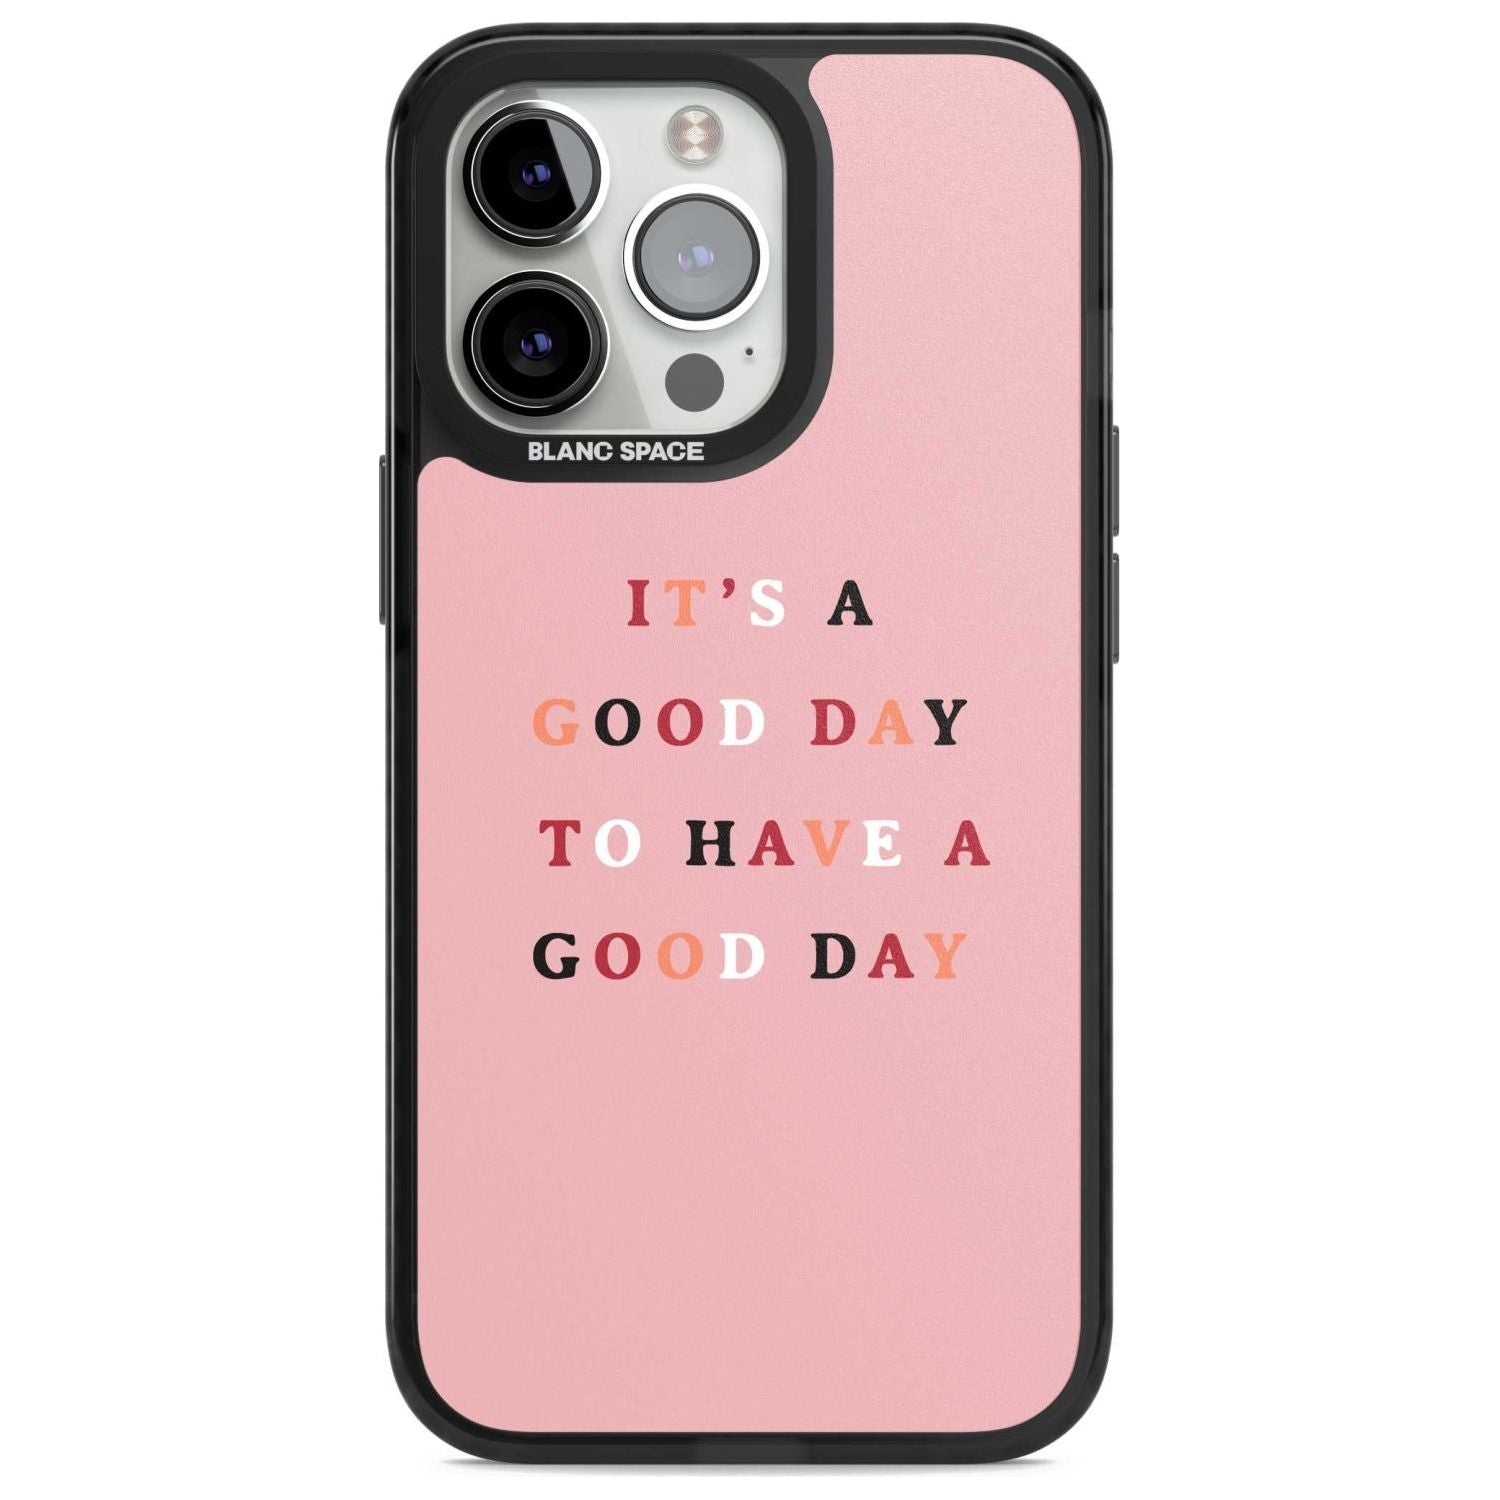 It's a good day to have a good day Phone Case iPhone 15 Pro Max / Magsafe Black Impact Case,iPhone 15 Pro / Magsafe Black Impact Case,iPhone 14 Pro Max / Magsafe Black Impact Case,iPhone 14 Pro / Magsafe Black Impact Case,iPhone 13 Pro / Magsafe Black Impact Case Blanc Space